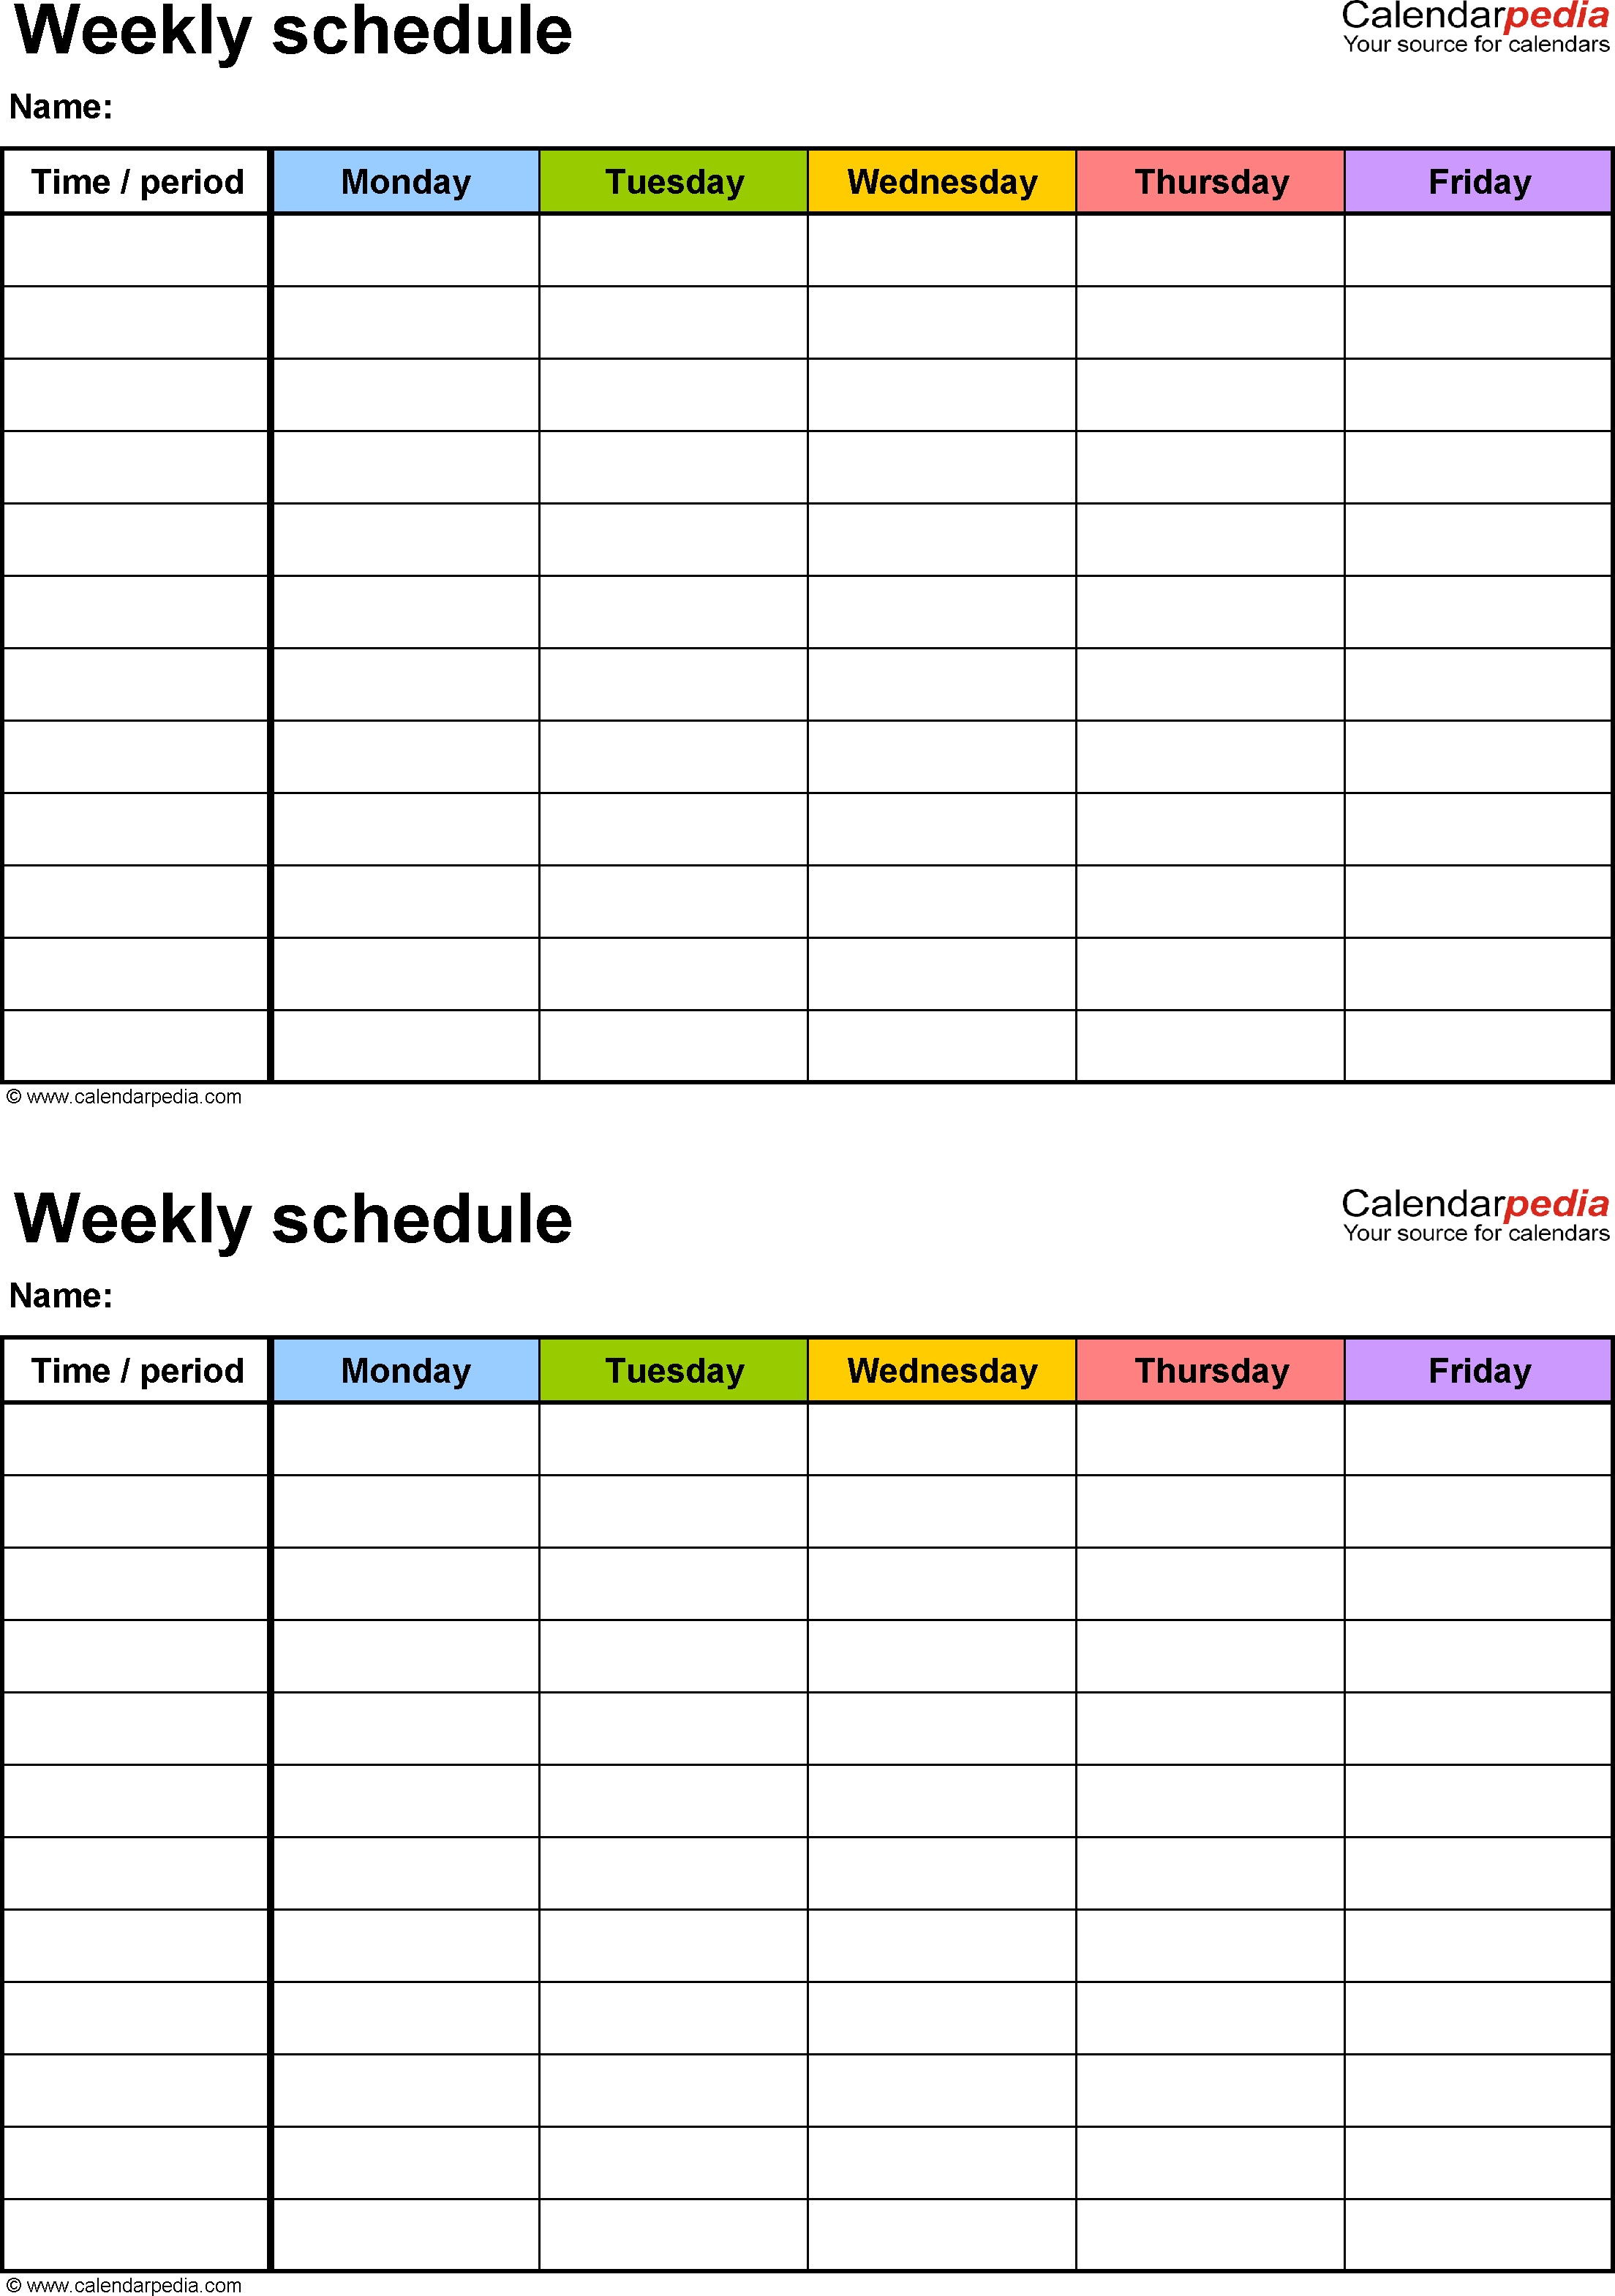 Free Weekly Schedule Templates For Pdf - 18 Templates pertaining to Printable Weekly Planner Calendar Template